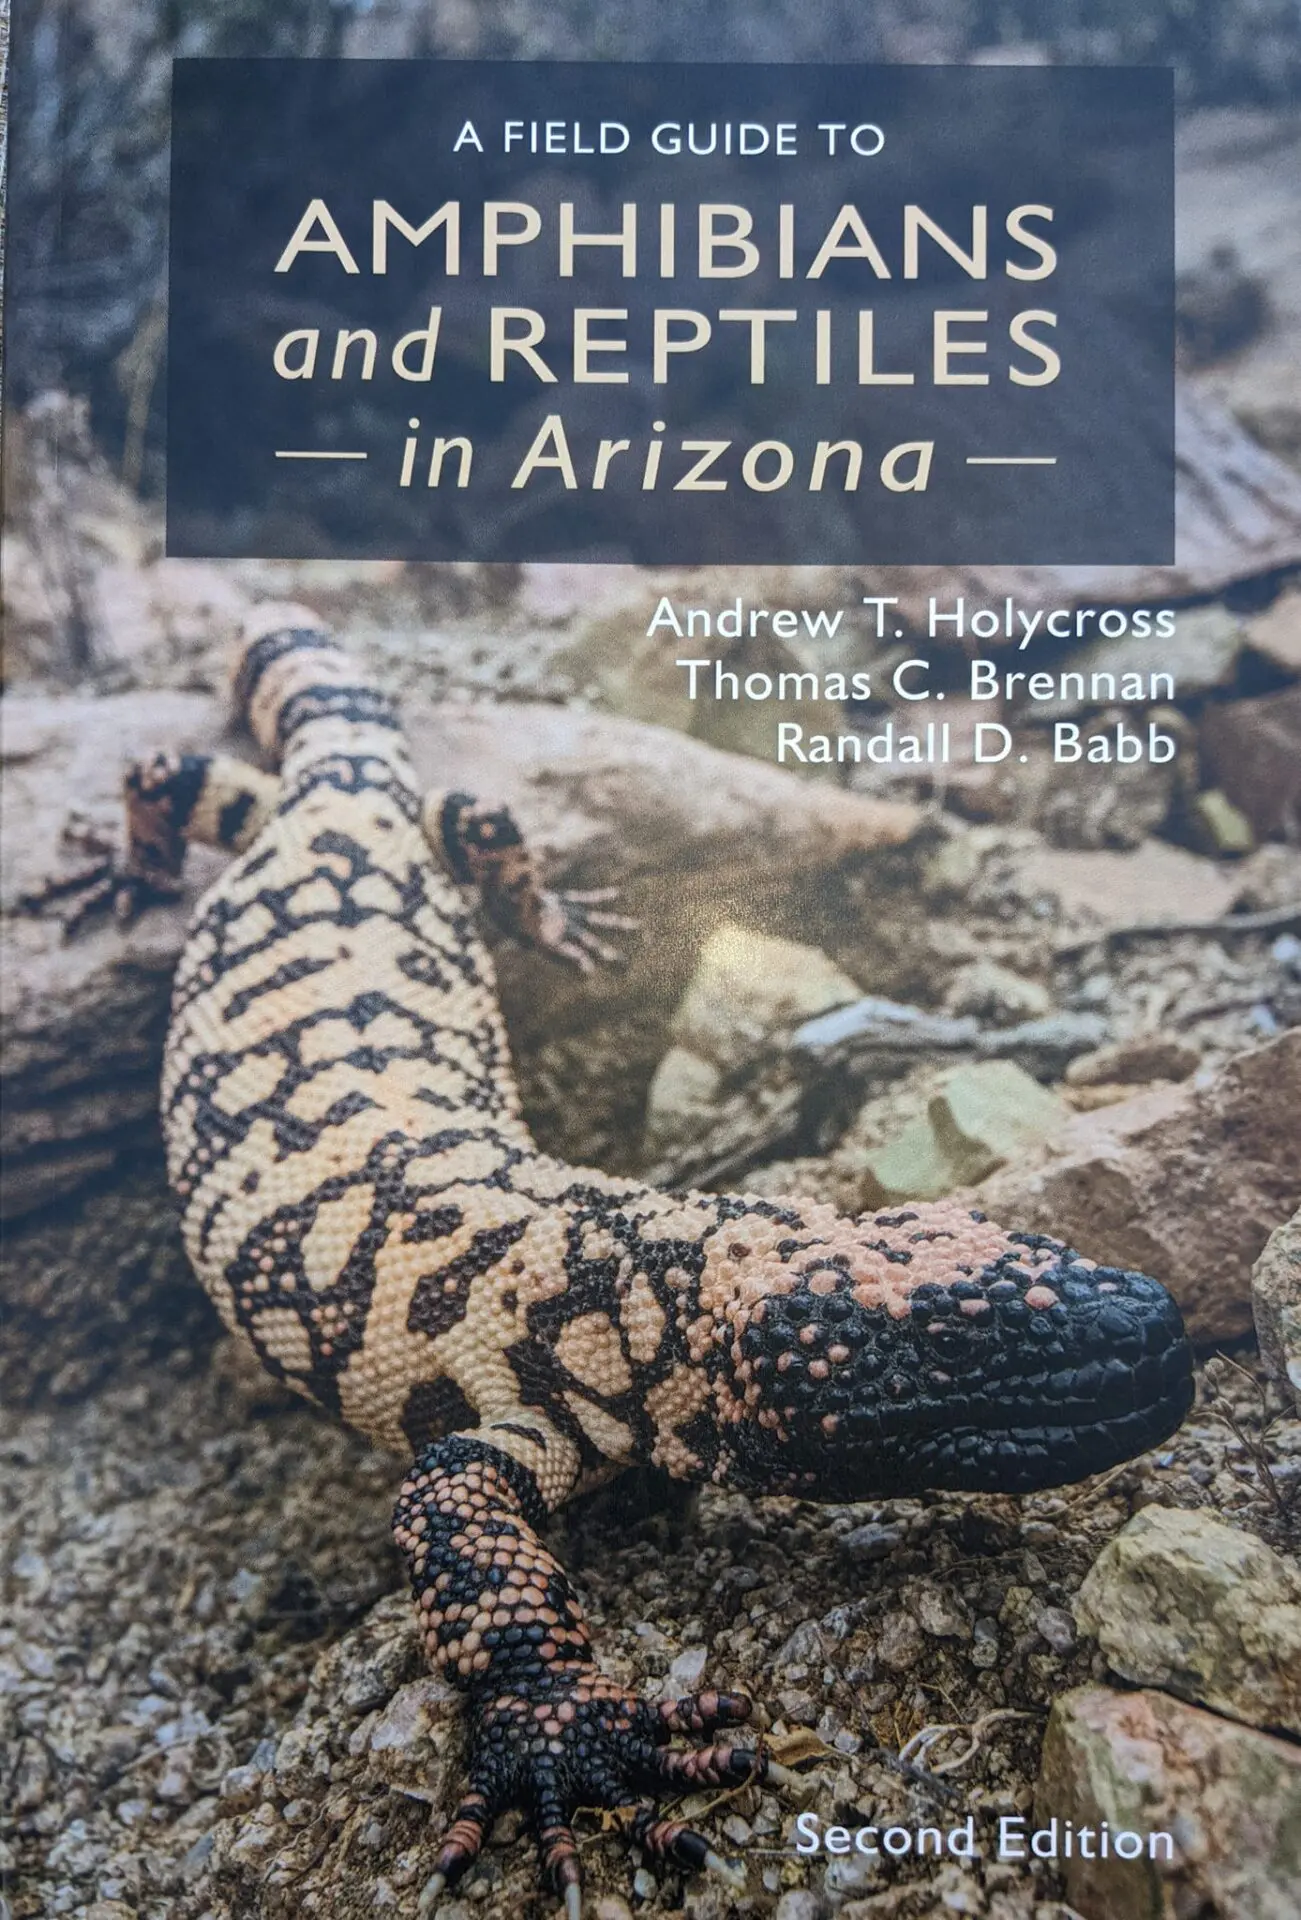 A book cover with an image of a lizard.